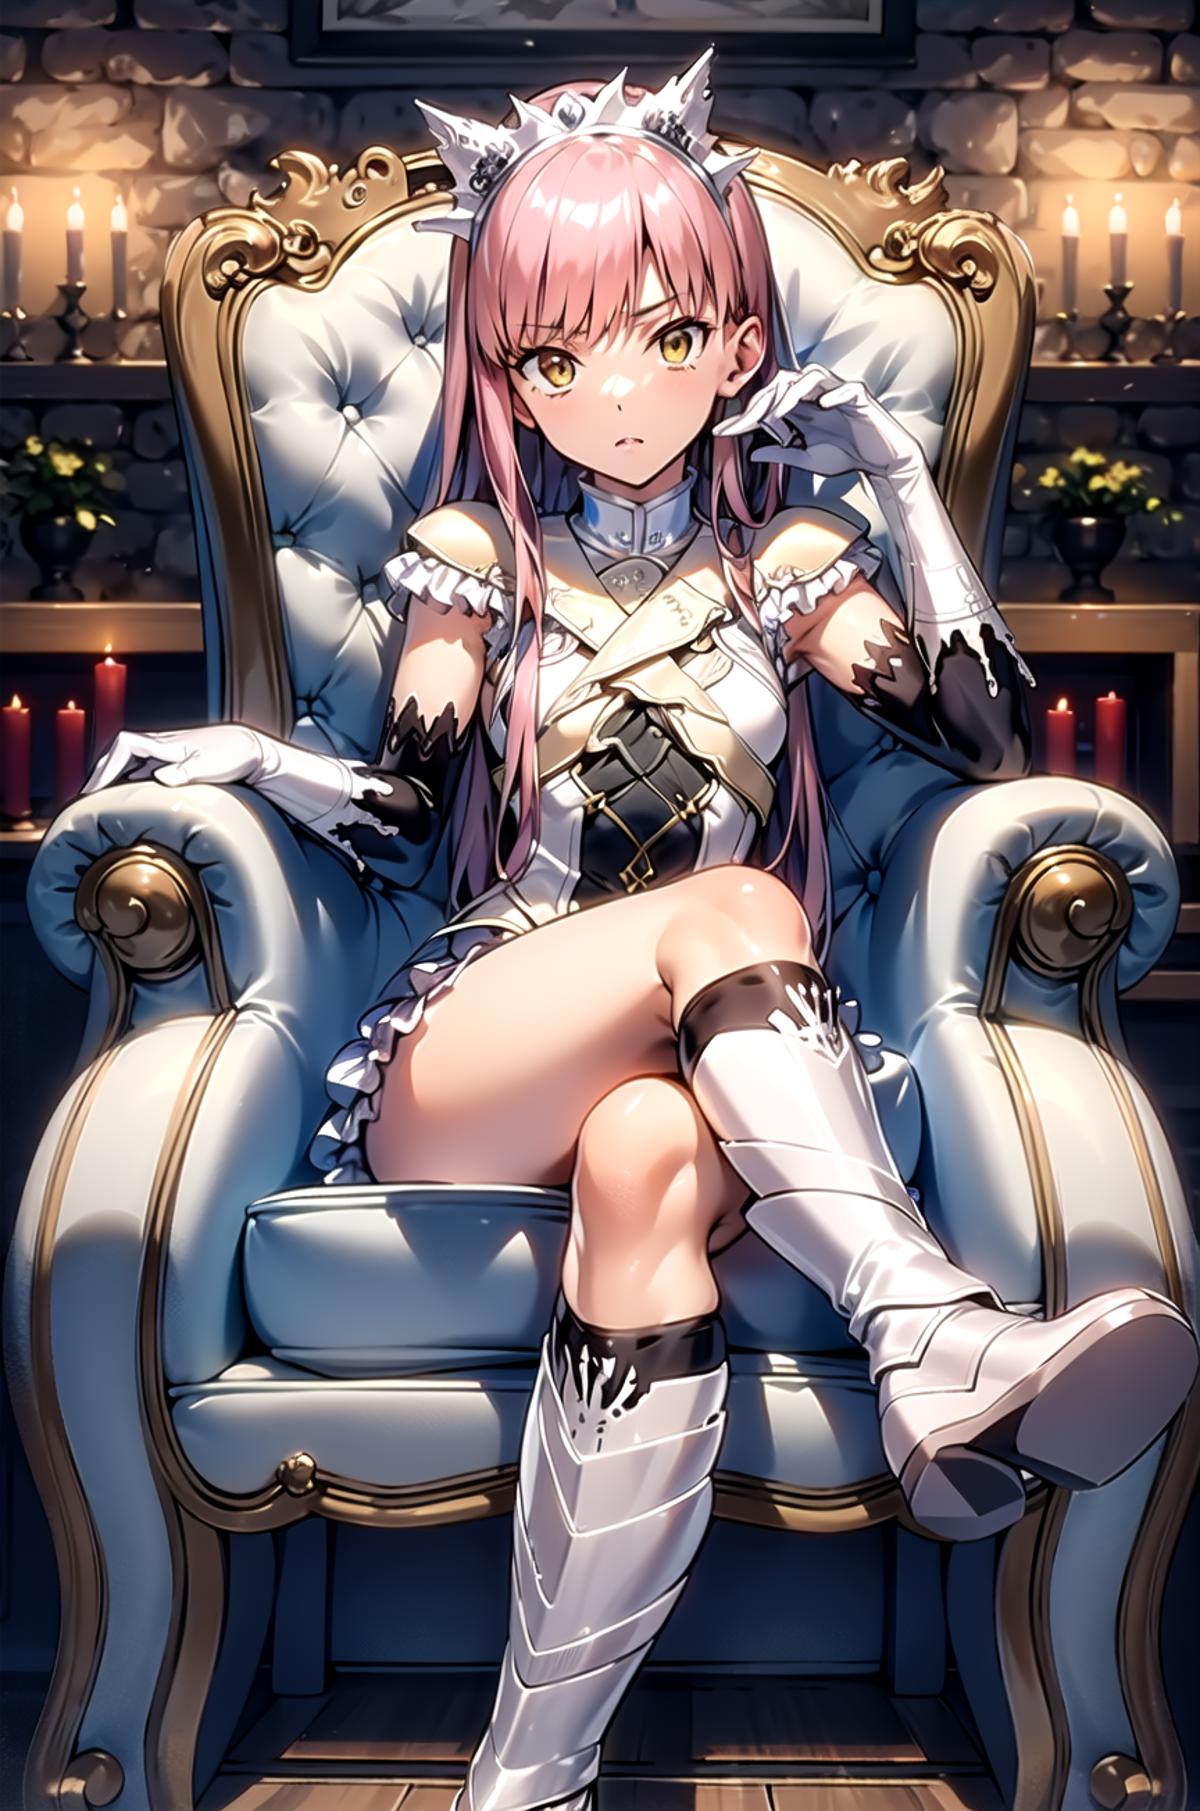 Queen Medb (Fate Grand Order) image by Deto15